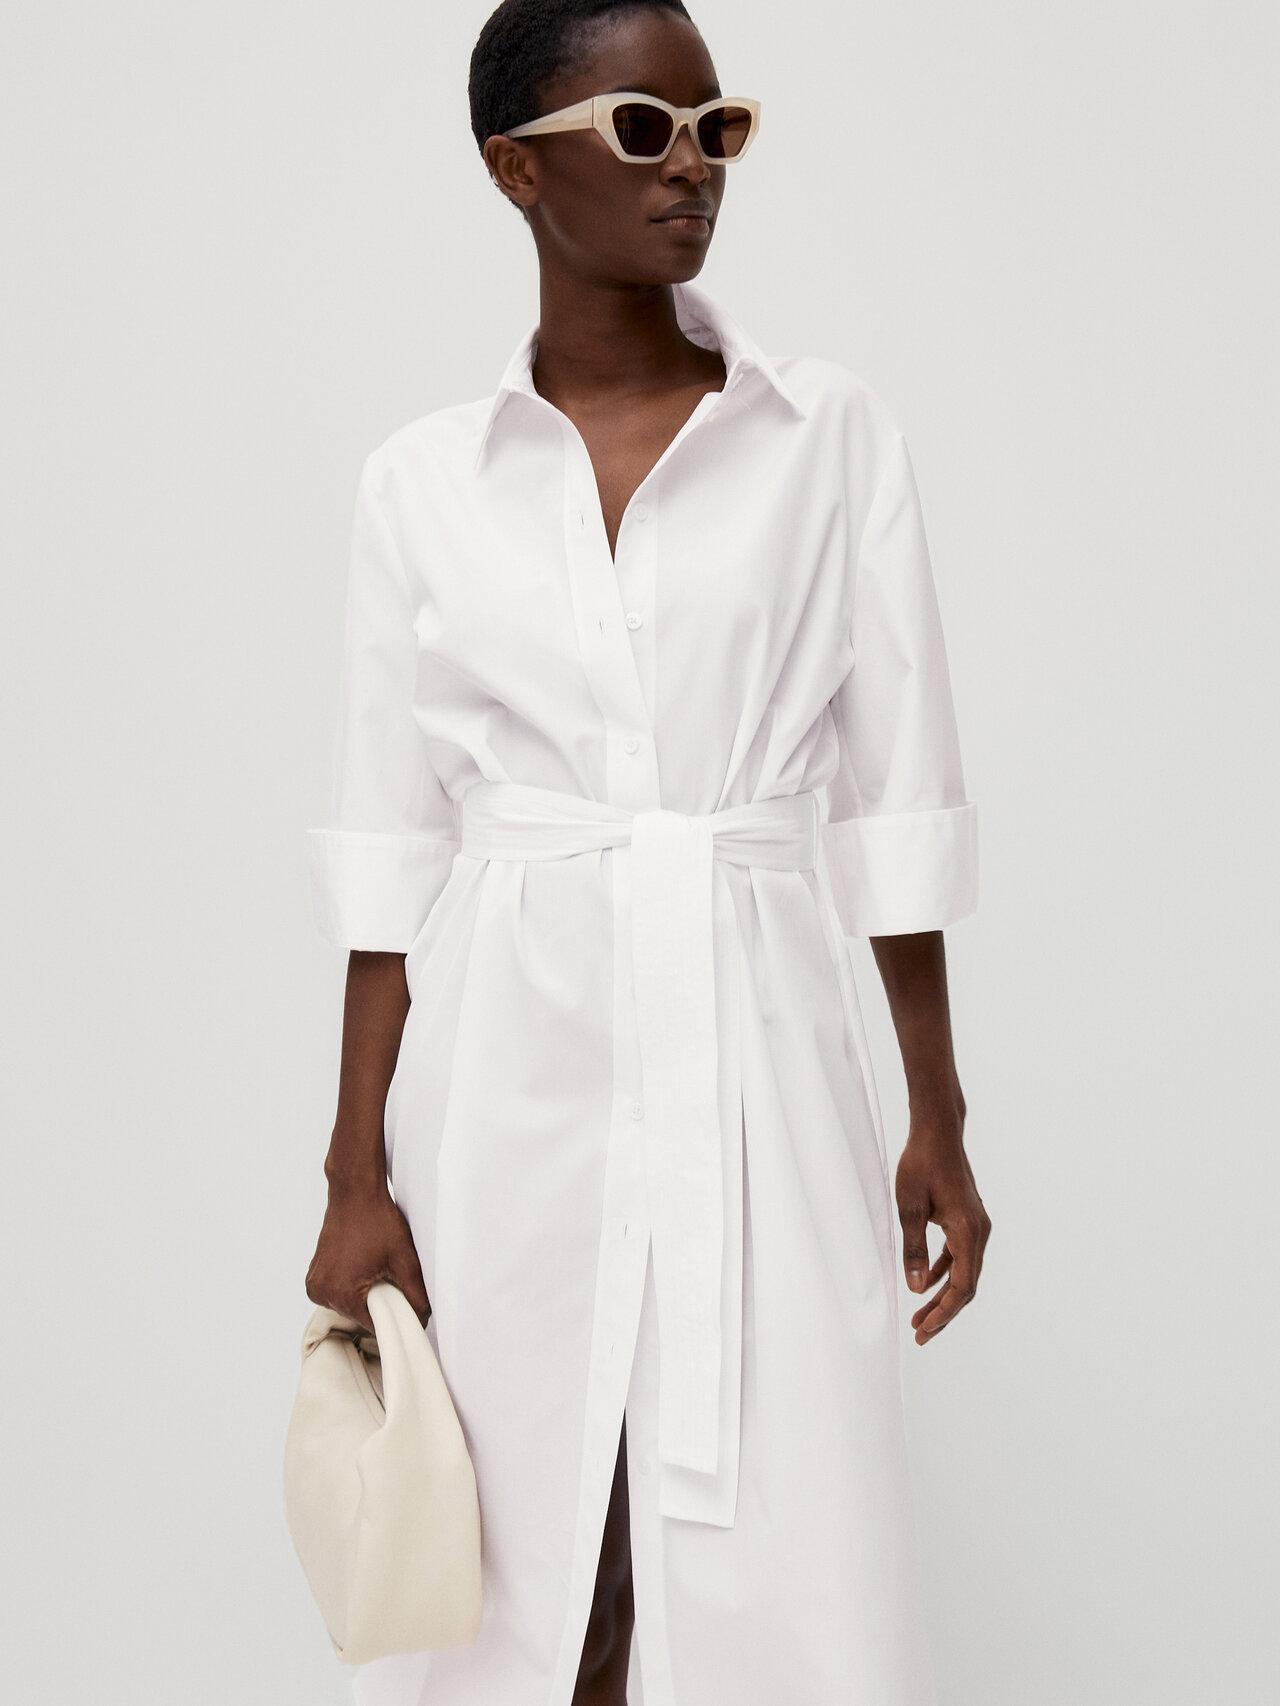 MASSIMO DUTTI Long Poplin Dress With Tie in White | Lyst